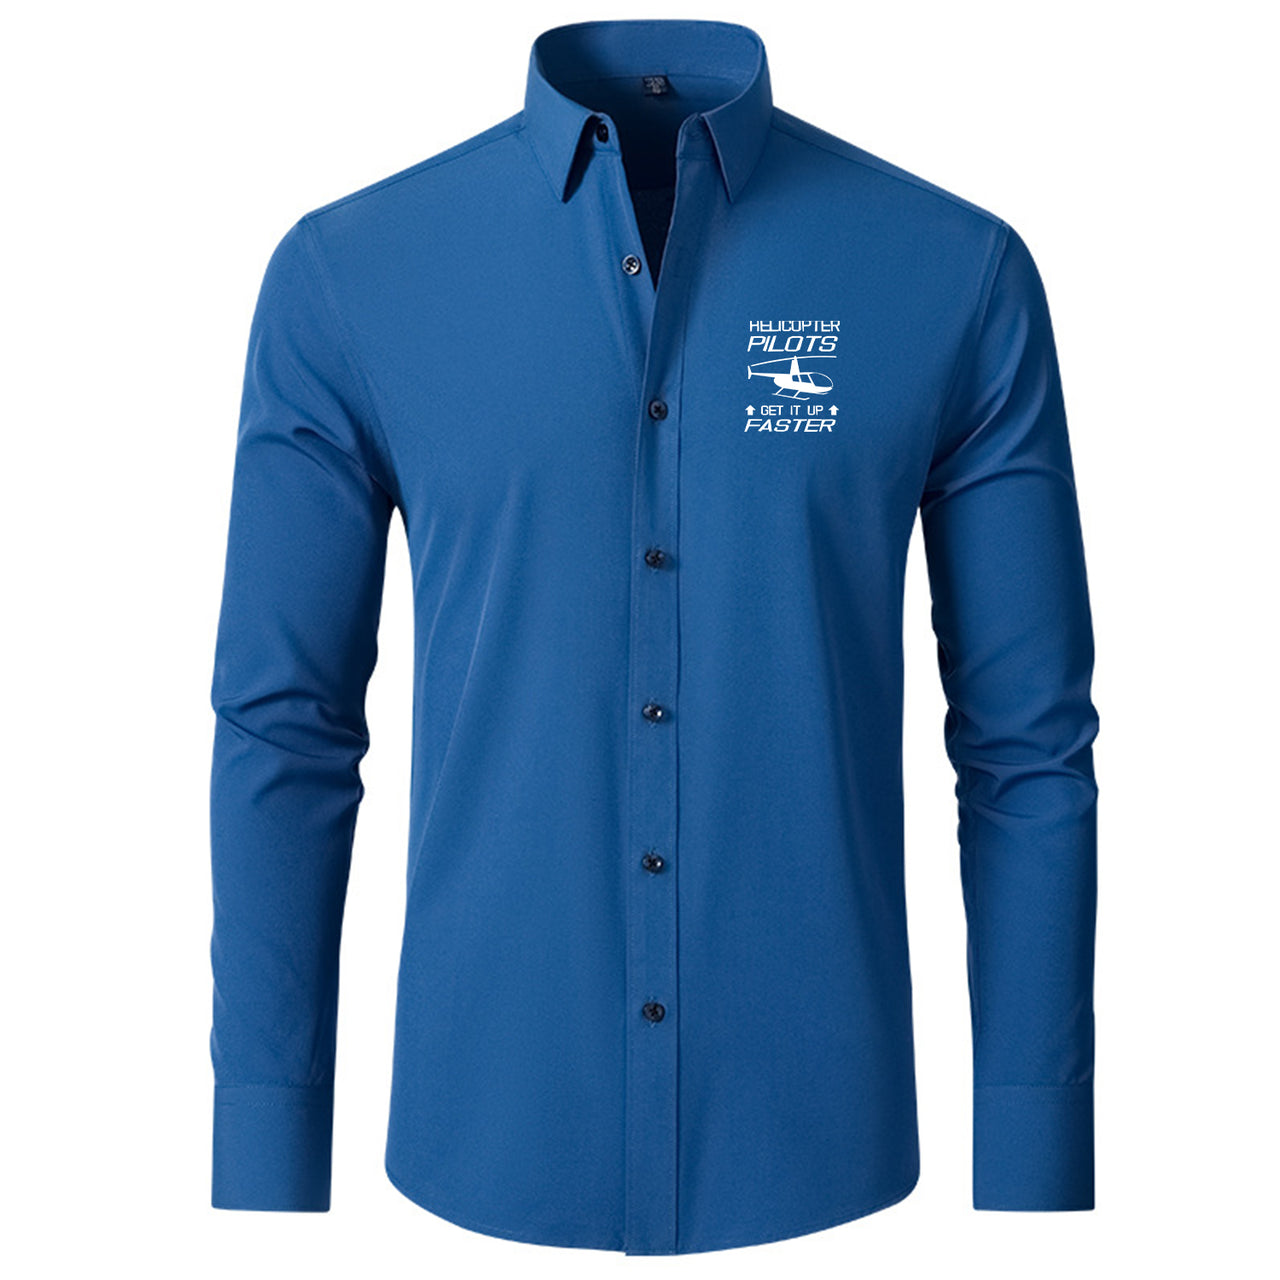 Helicopter Pilots Get It Up Faster Designed Long Sleeve Shirts